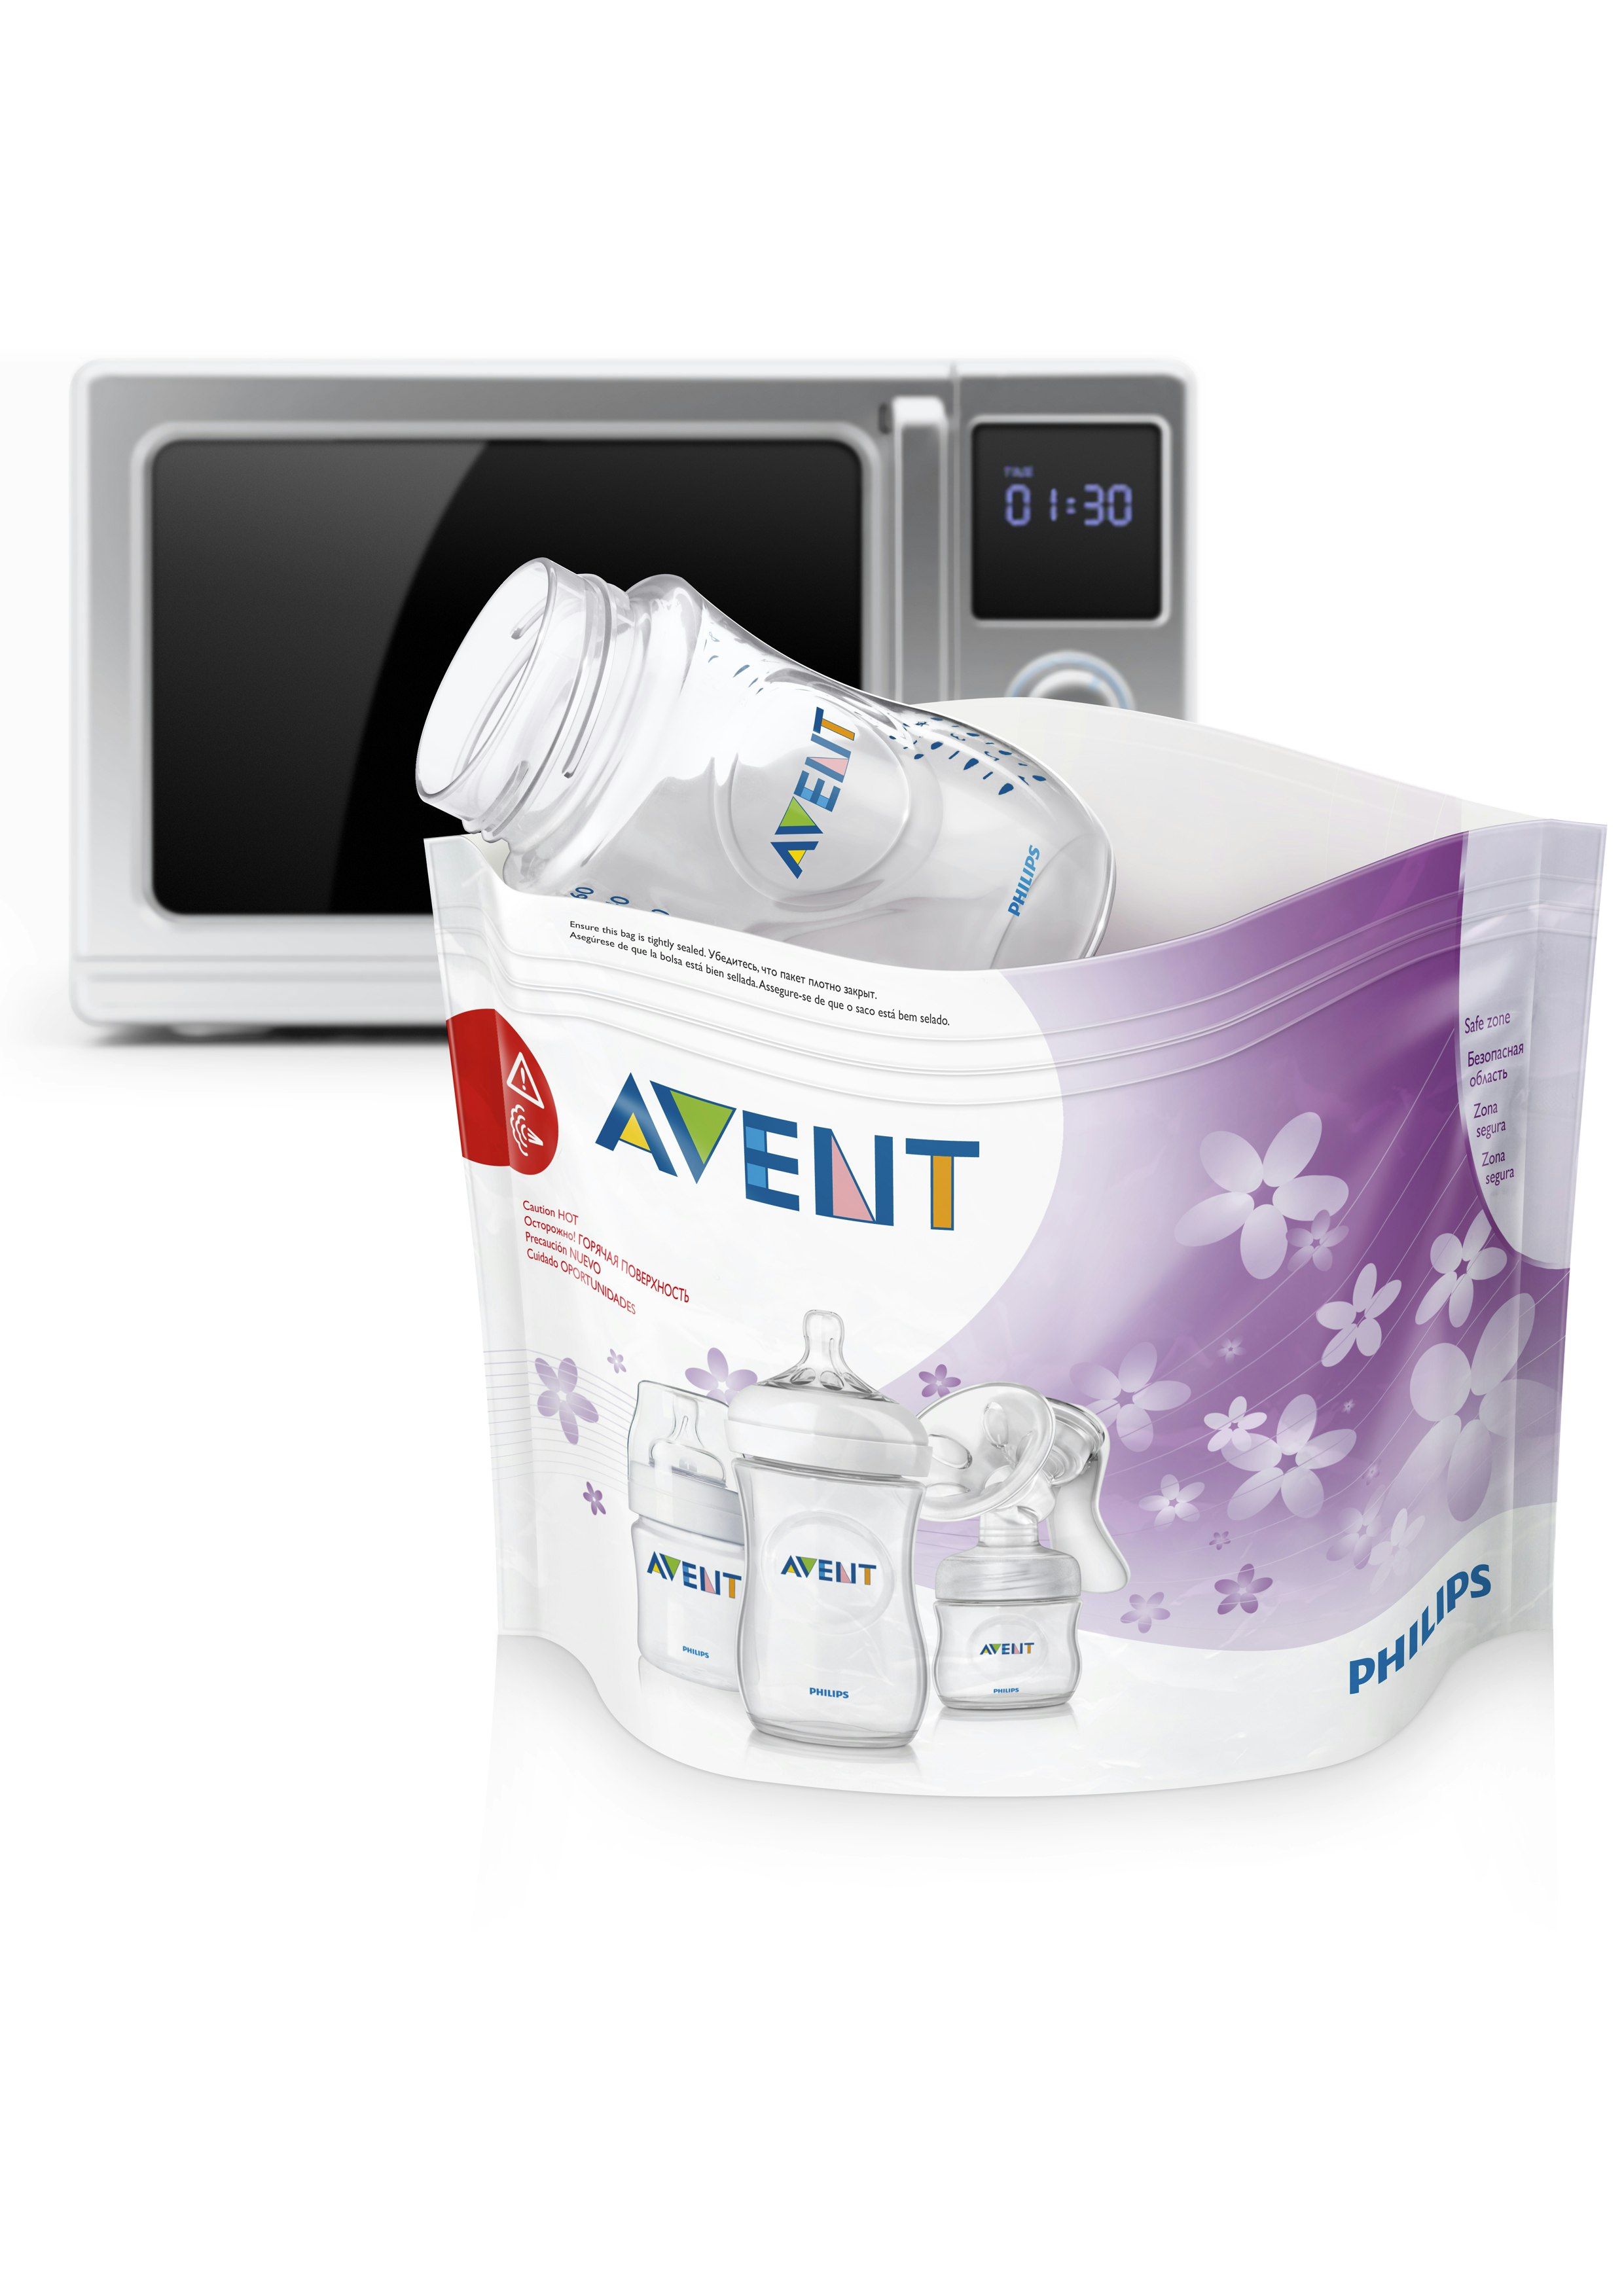 https://images.bauerhosting.com/affiliates/sites/12/motherandbaby/legacy/root/6-philips-avent-microwave-steam-steriliser-bags.jpg?ar=16%3A9&fit=crop&crop=top&auto=format&w=undefined&q=80